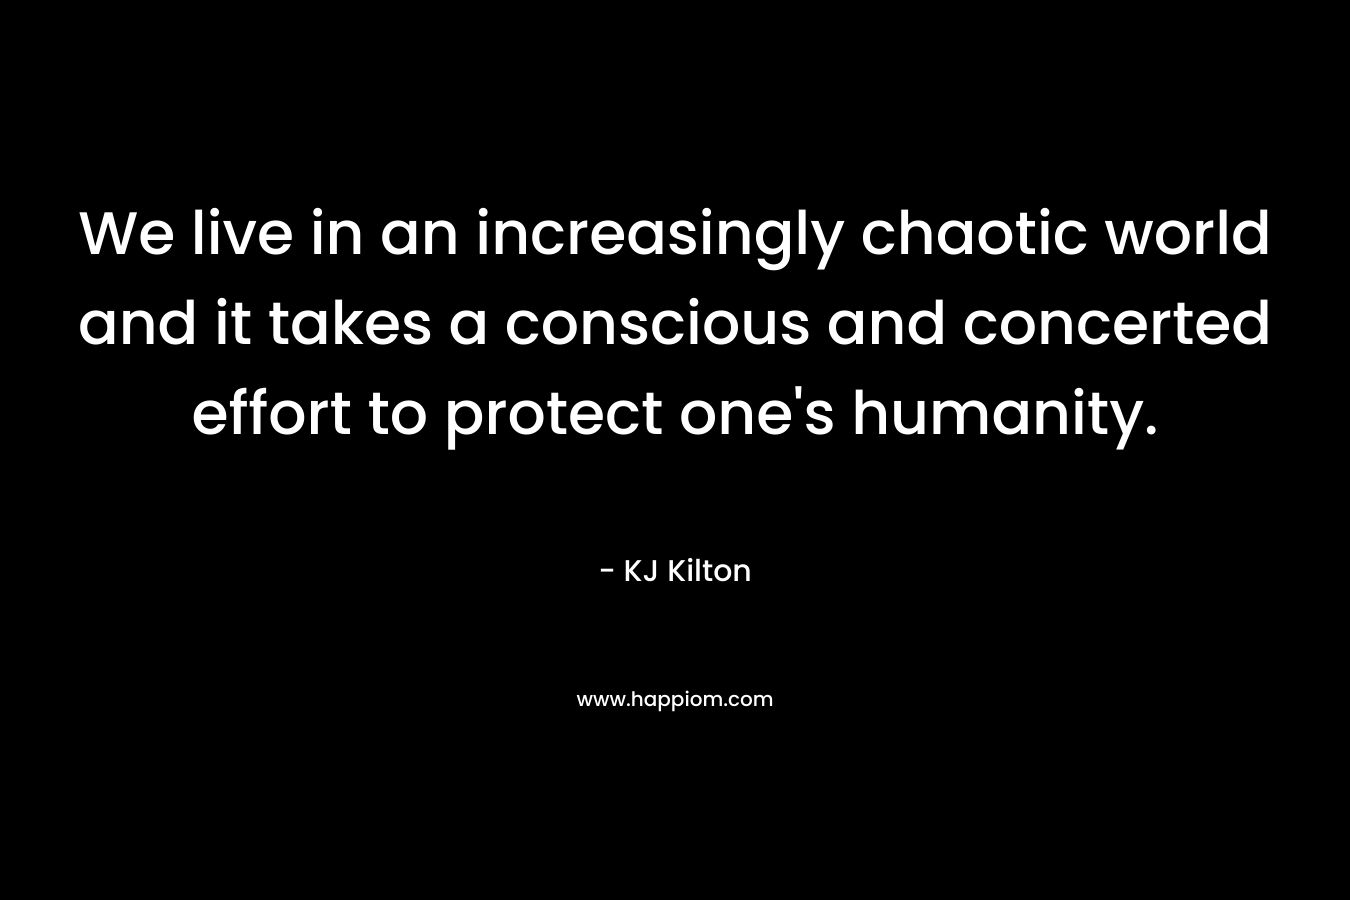 We live in an increasingly chaotic world and it takes a conscious and concerted effort to protect one’s humanity. – KJ Kilton